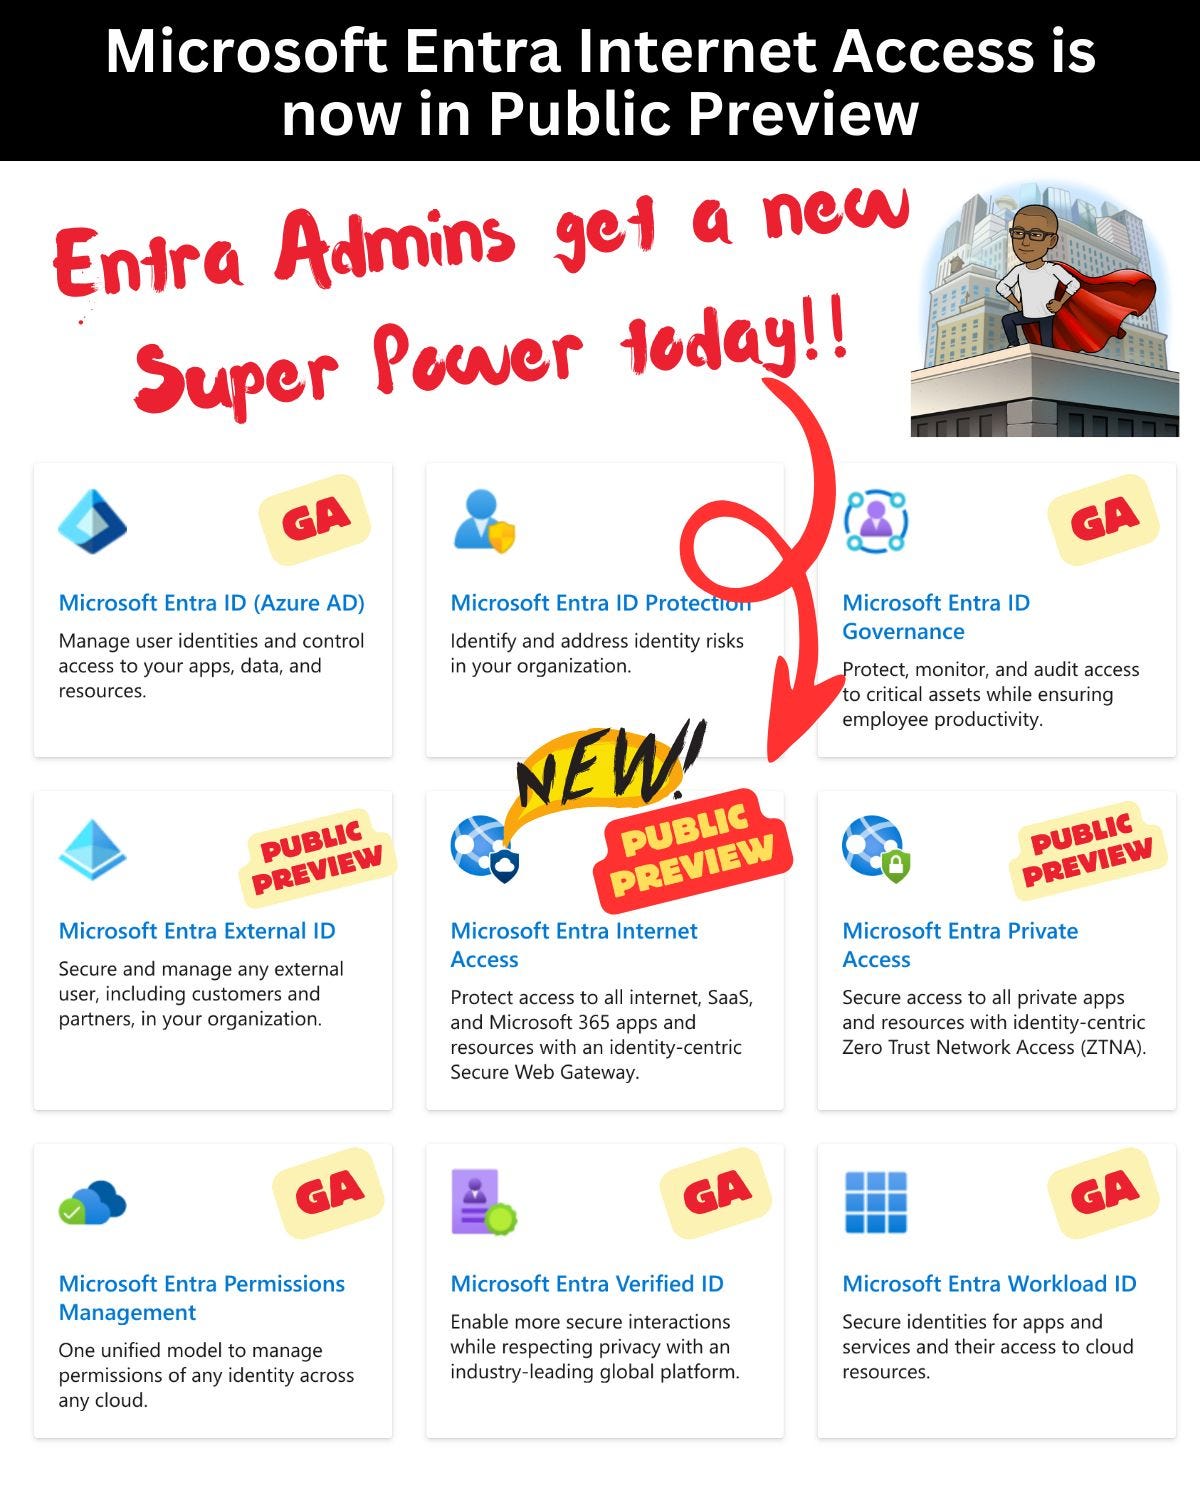 Microsoft Entra Internet Access is now in Public Preview

Entra Admins get a new 

Super Power today!!


Illustration showing all Entra products in Public Preview or GA. 